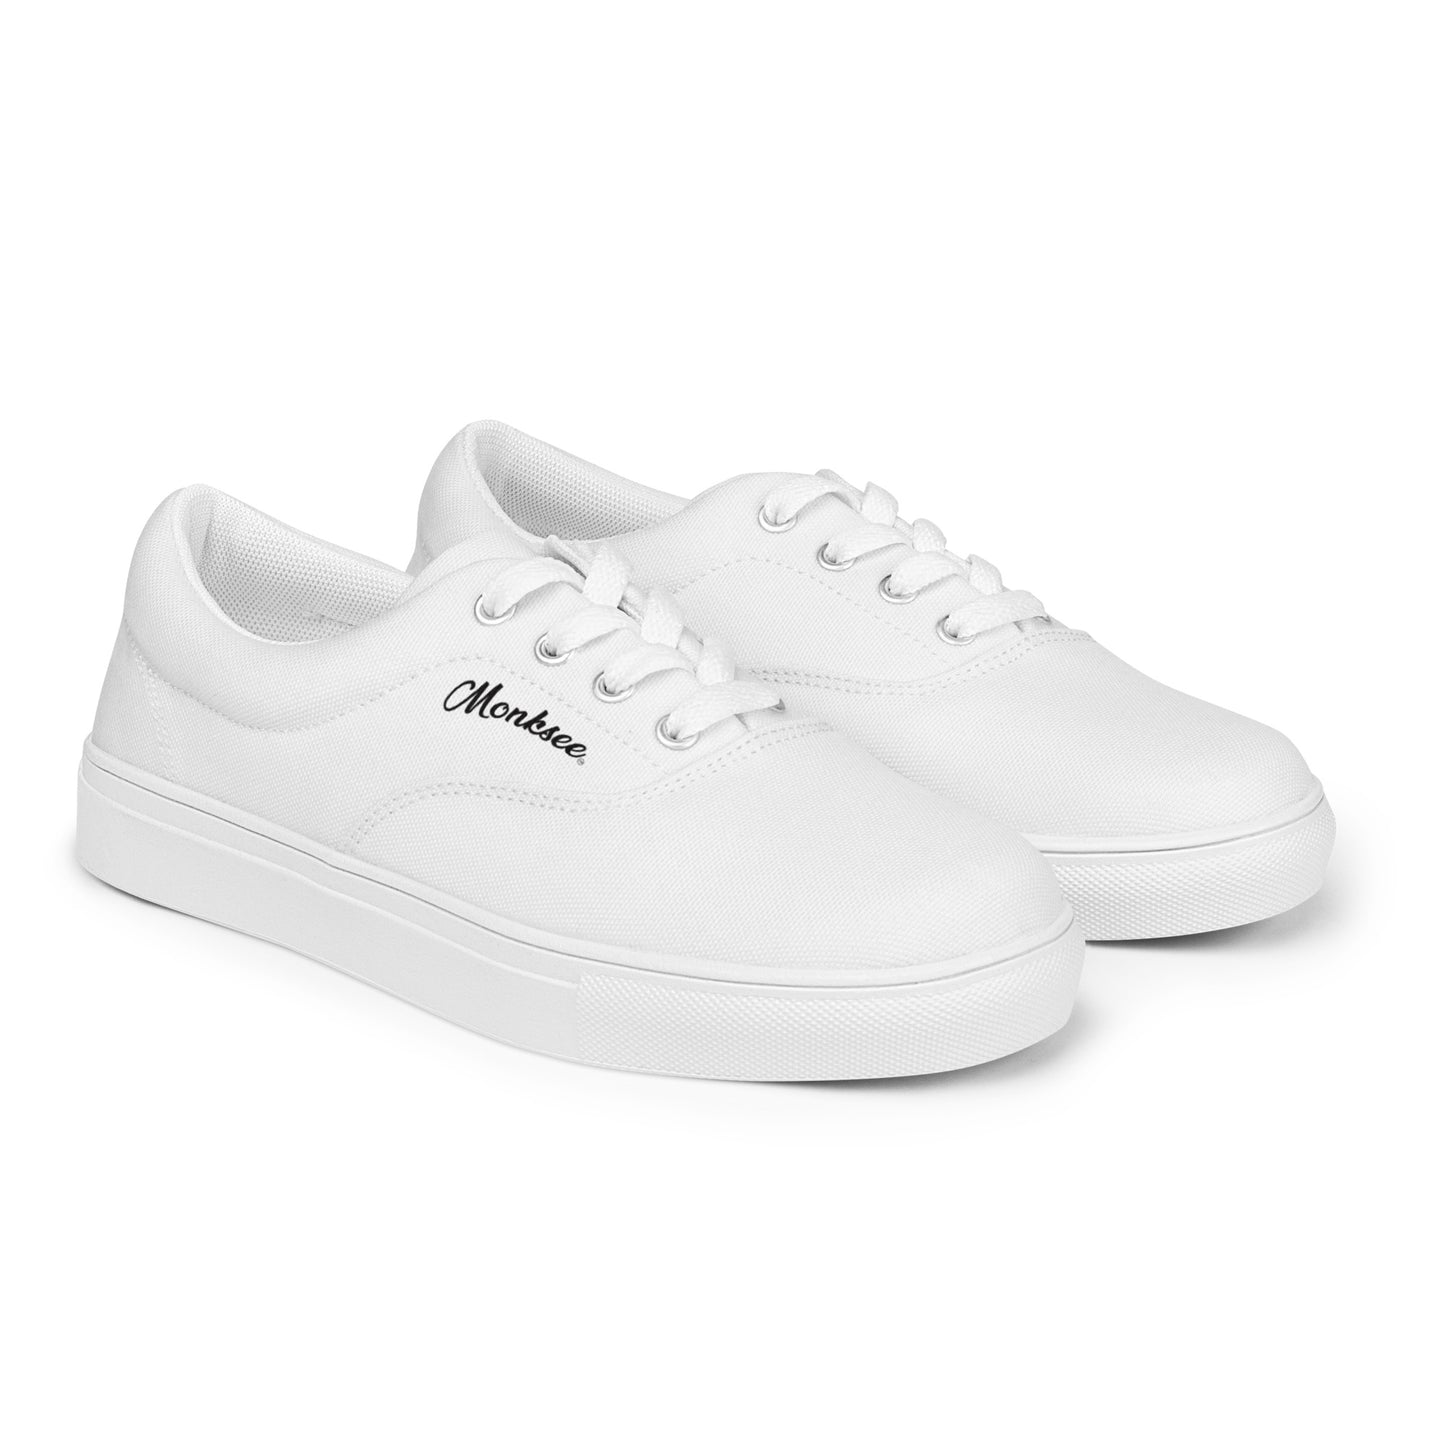 Stoked white - Men's Canvas shoes.